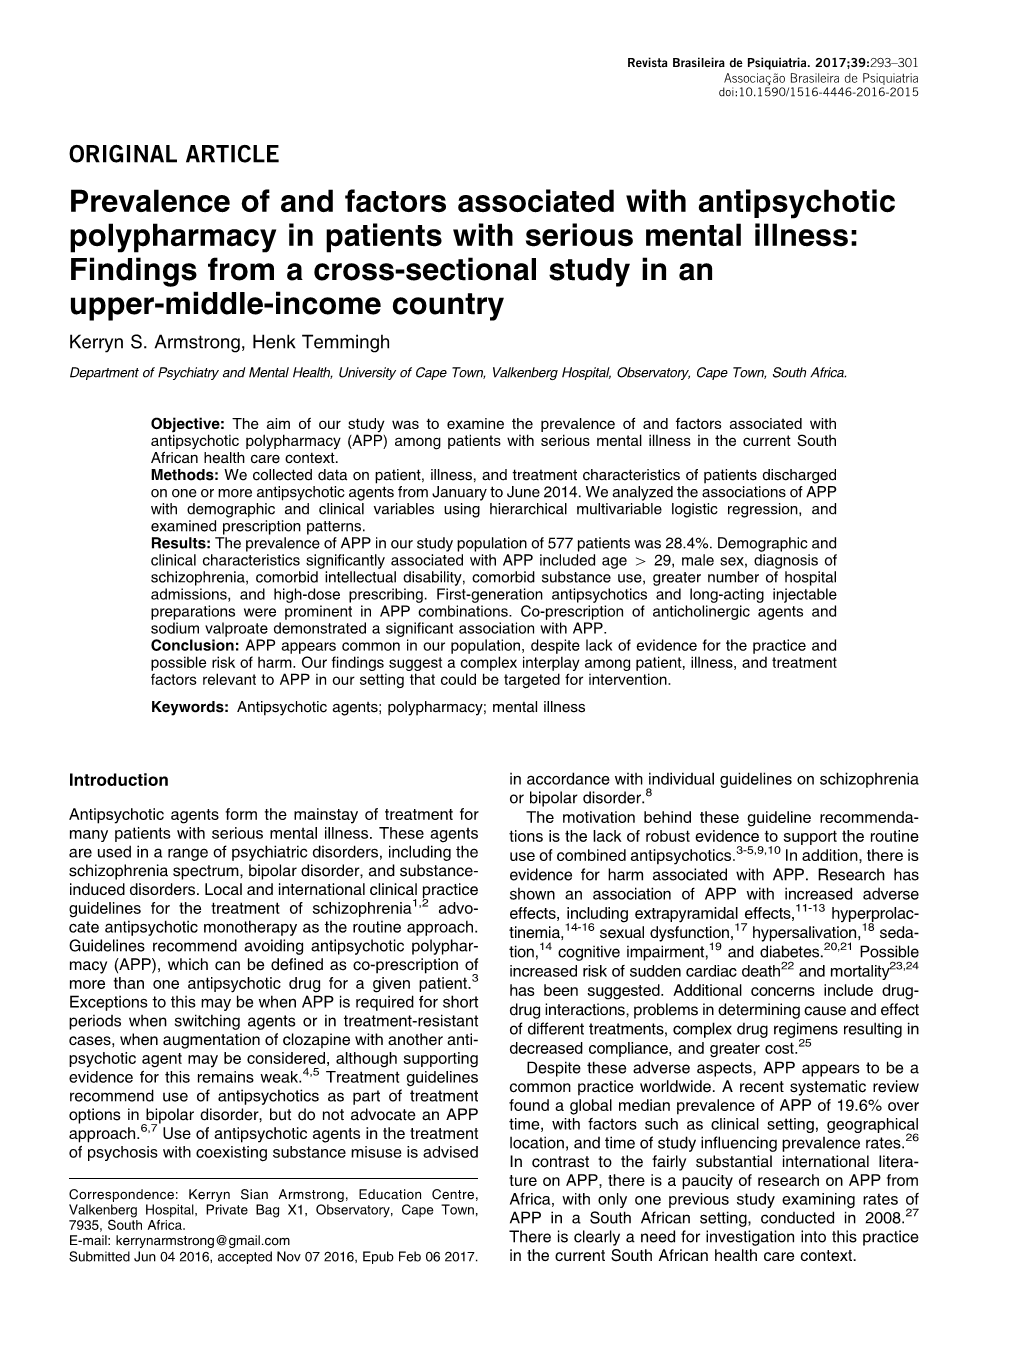 Prevalence of and Factors Associated with Antipsychotic